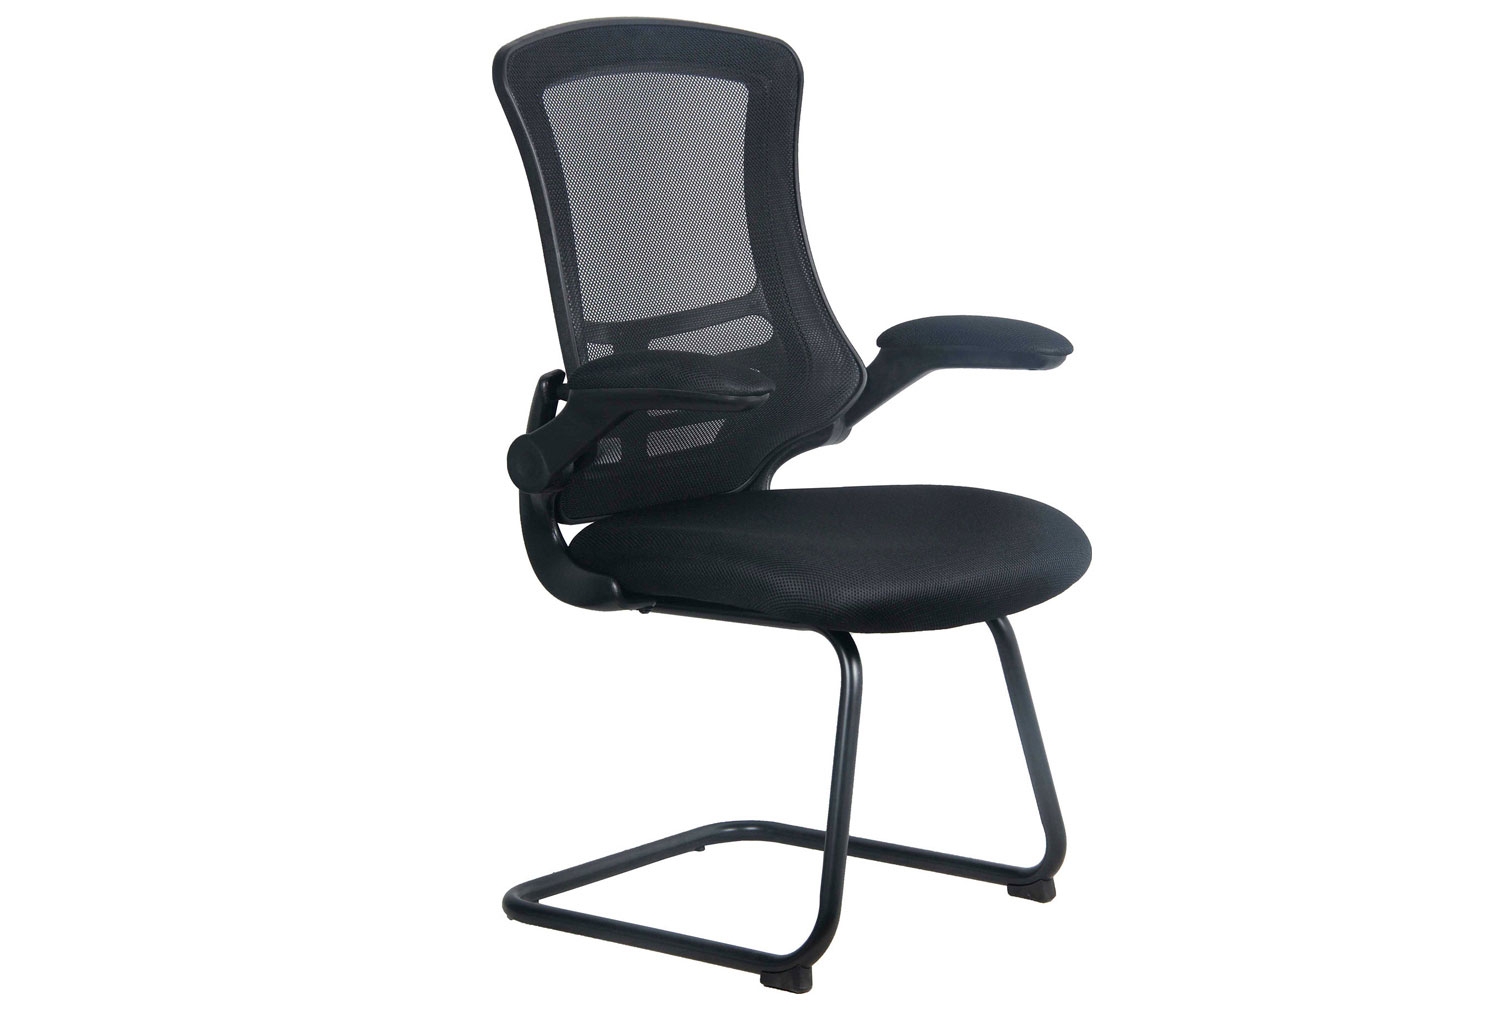 Moon Mesh Back Visitor Office Chair With Black Frame (Black), Fully Installed